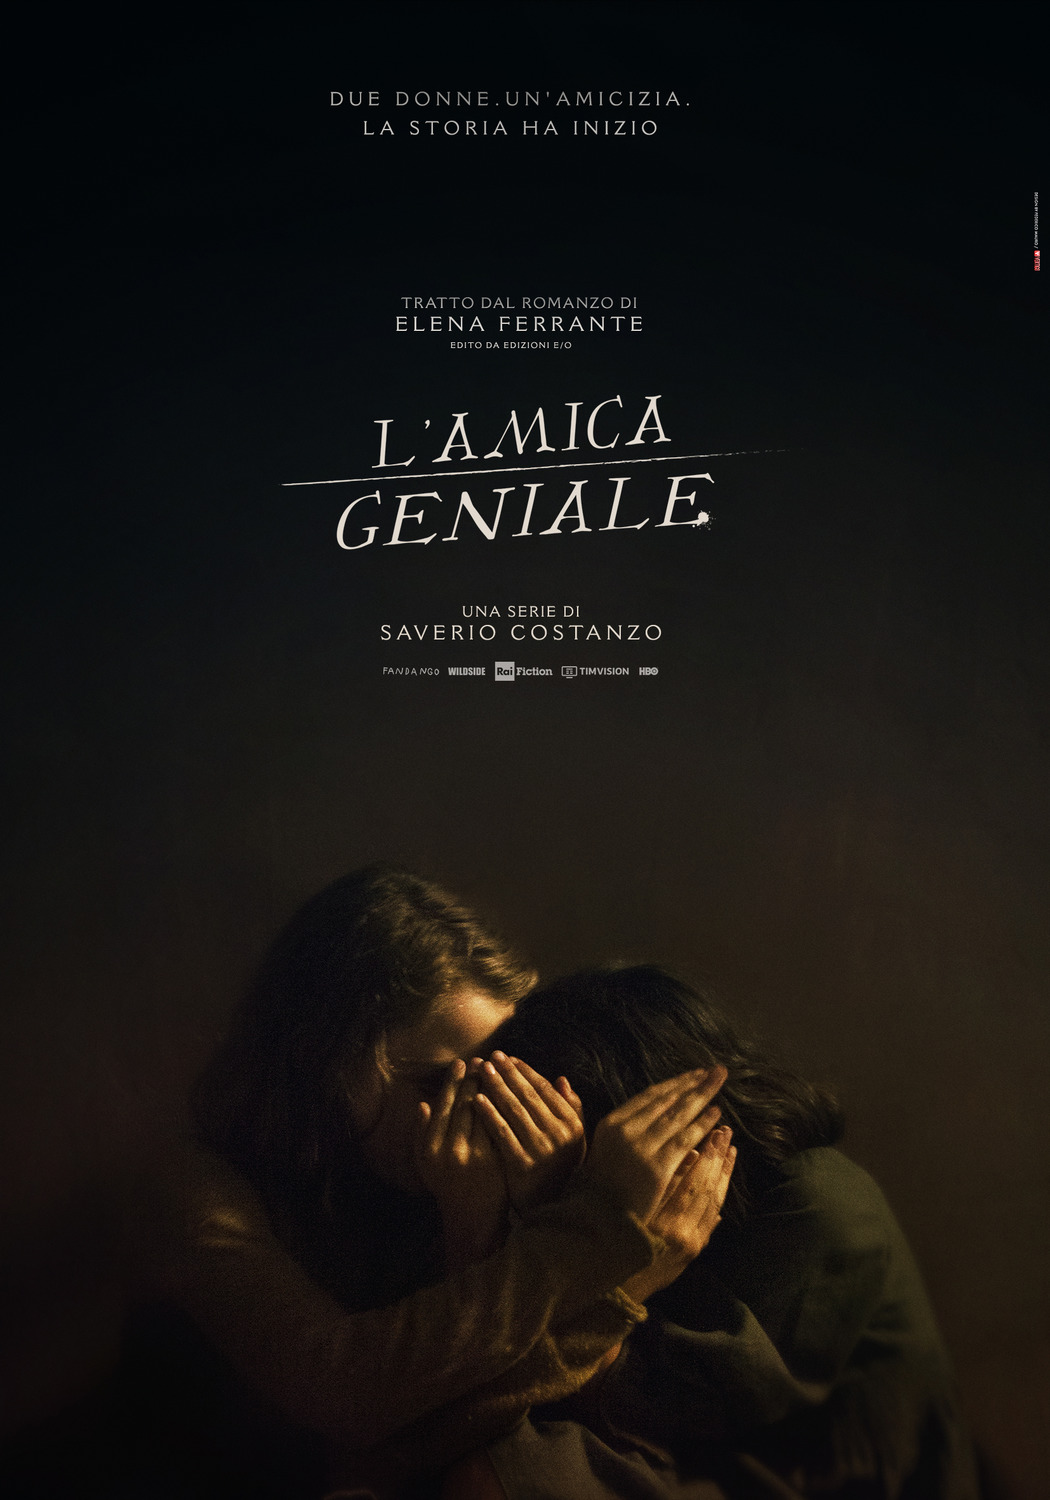 L'amica geniale (#3 of 10): Extra Large TV Poster Image - IMP Awards